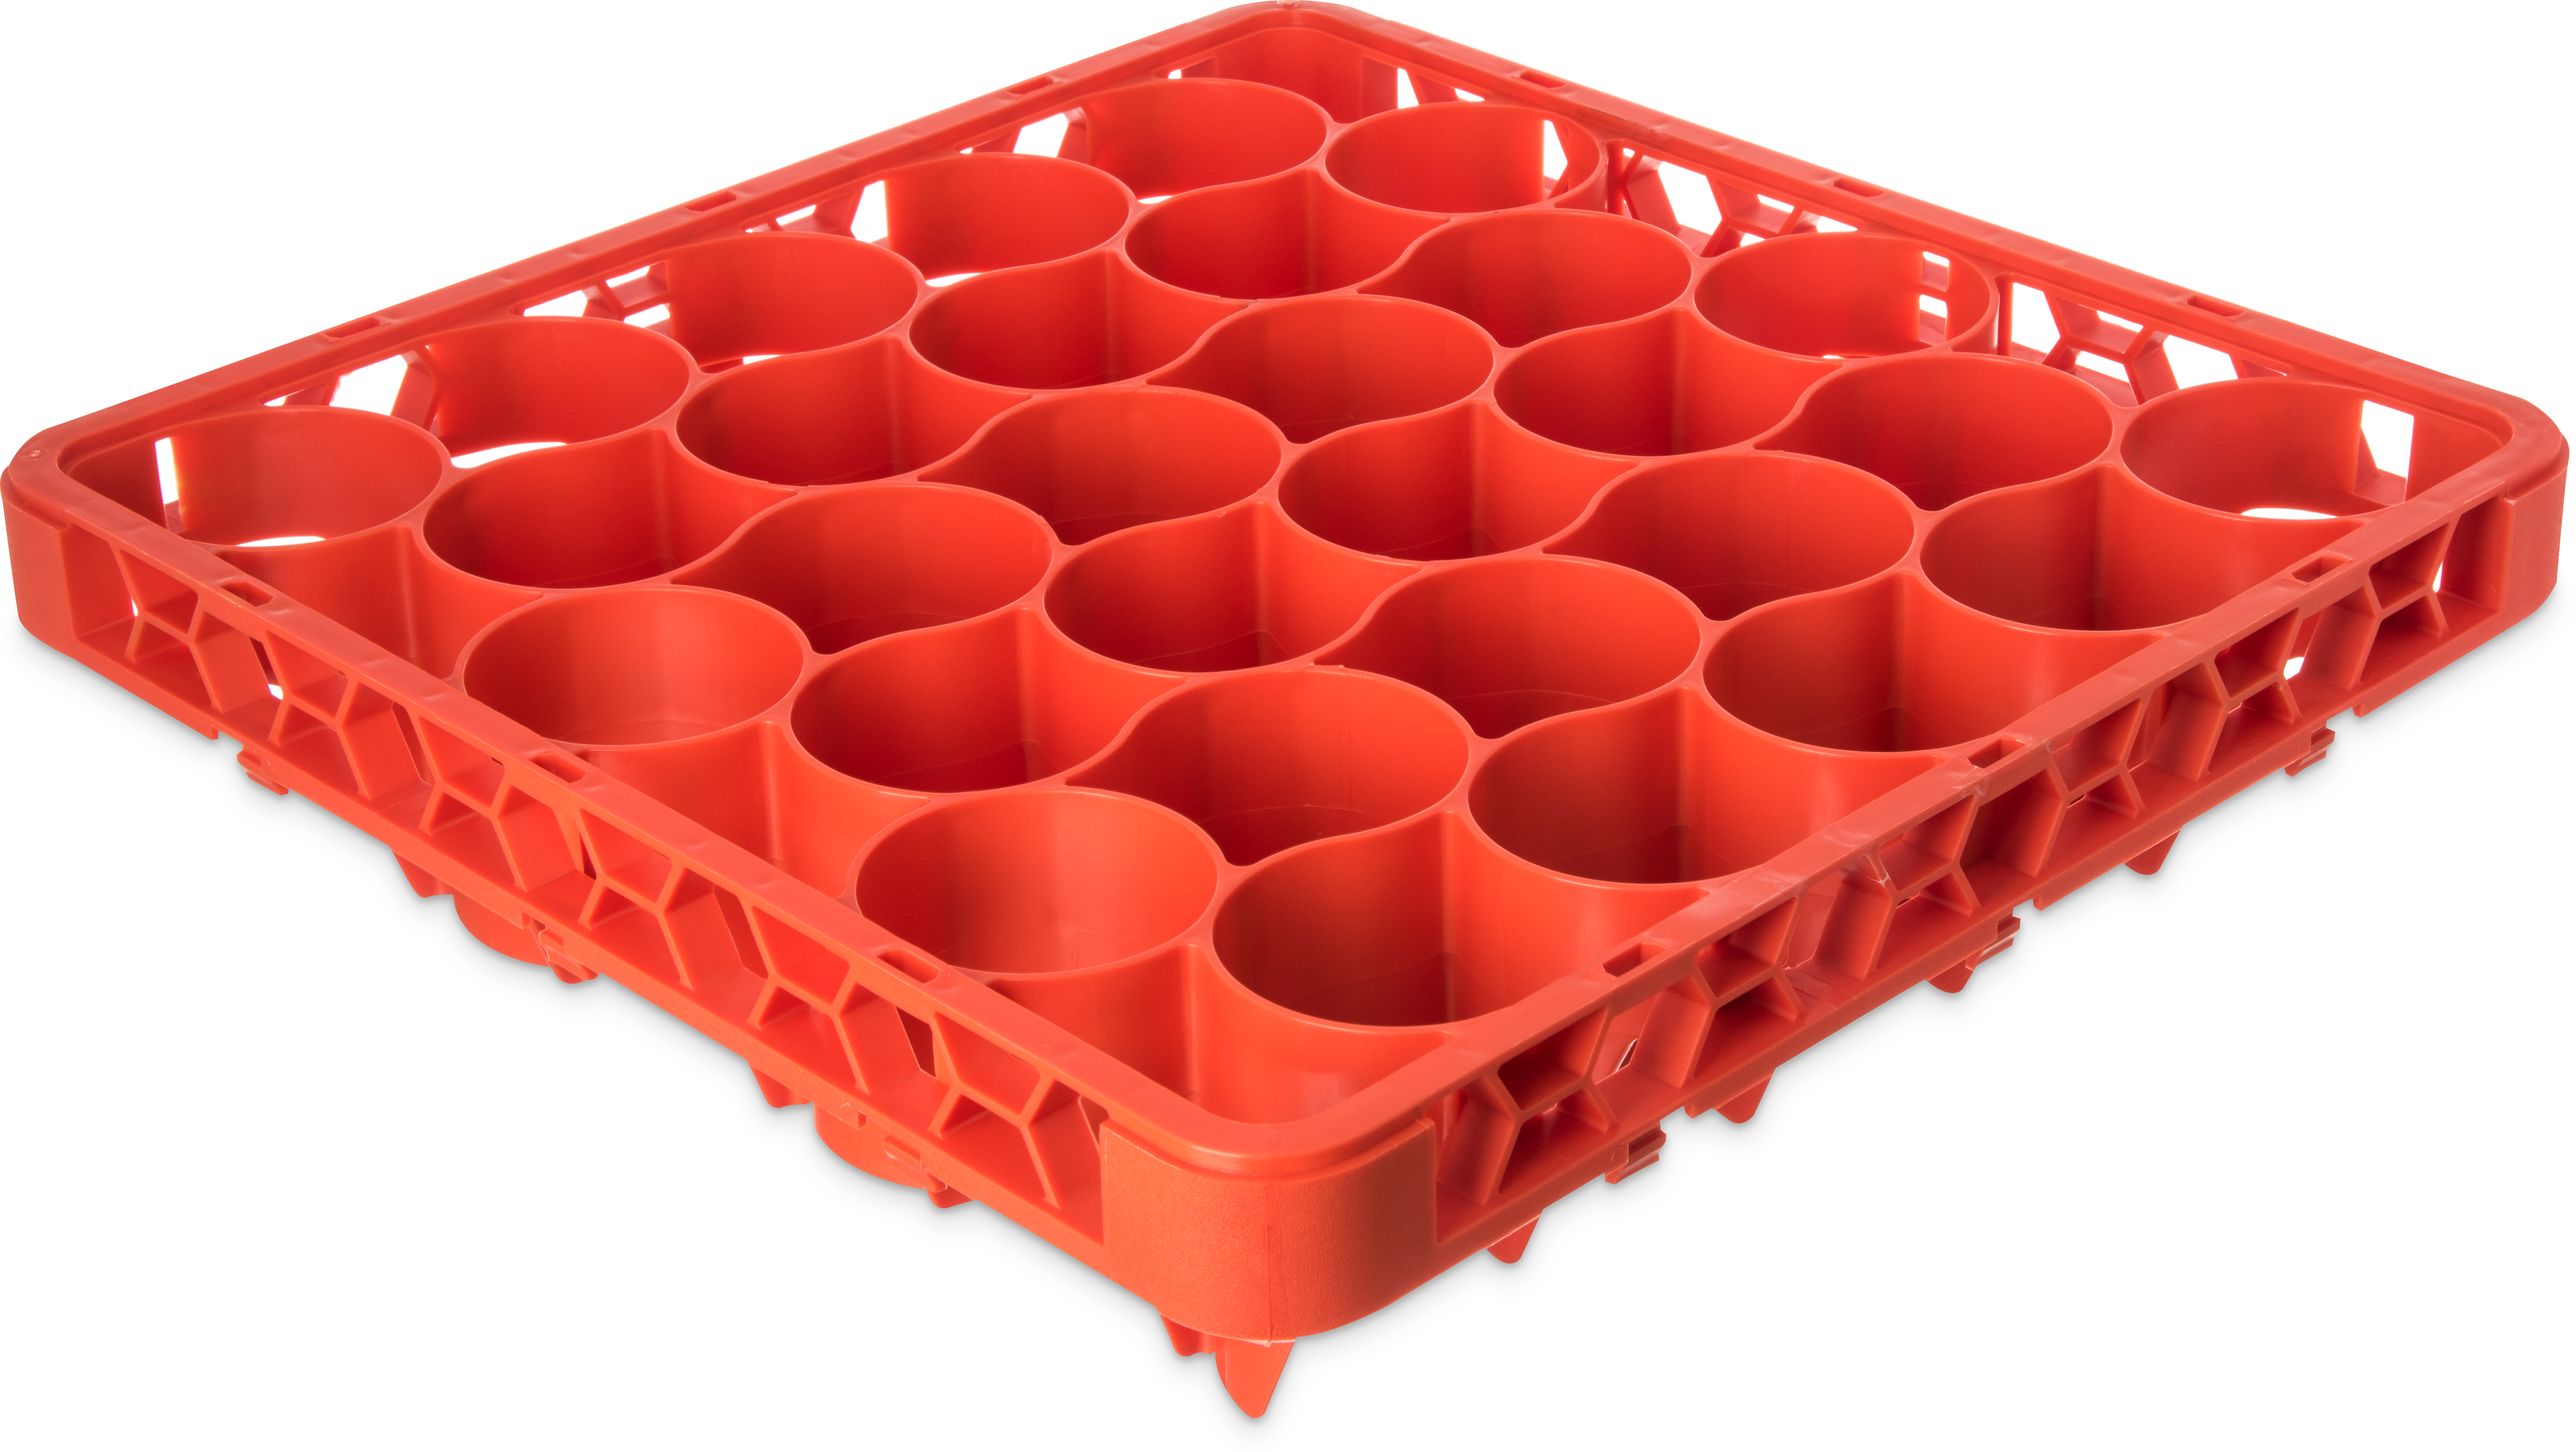 OptiClean NeWave Color-Coded Long Glass Rack Extender 30 Compartment - Orange